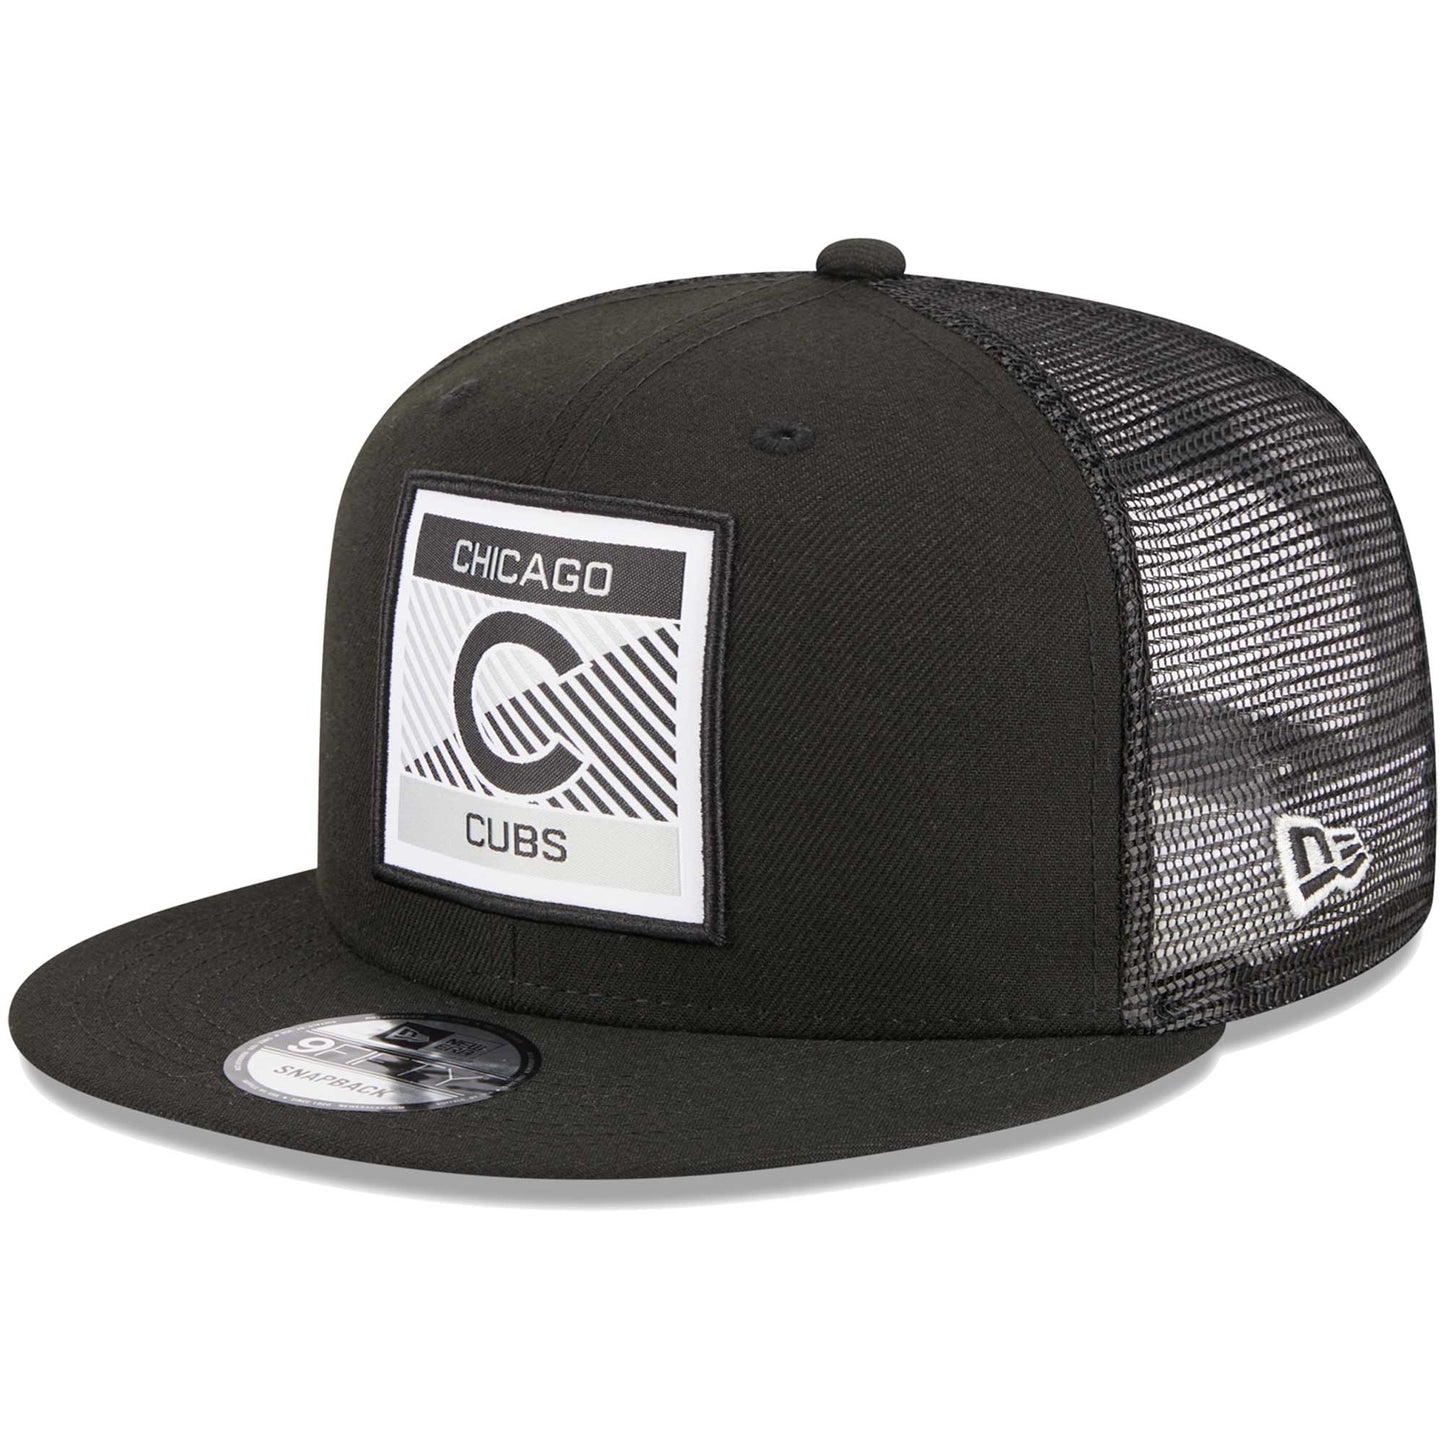 Chicago Cubs New Era Scratch Squared Trucker 9FIFTY Snapback Hat - Black